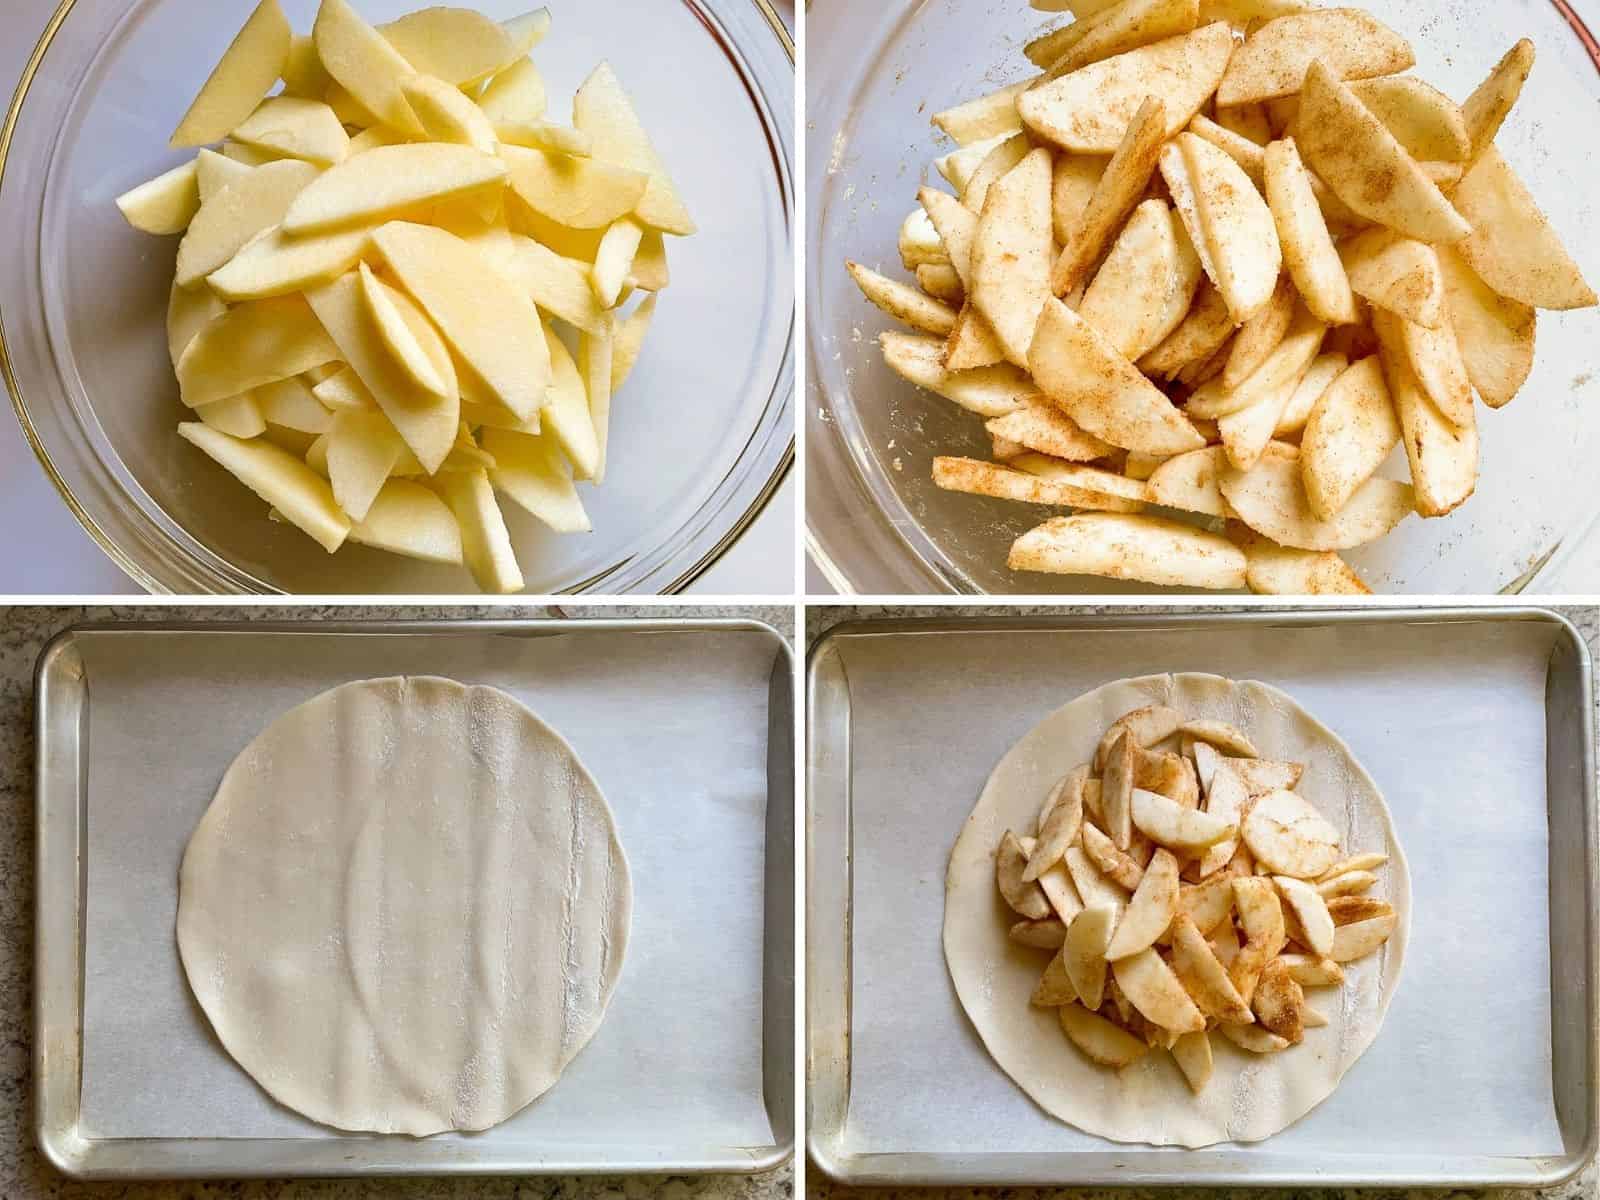 Clockwise: bowl of apple slices. Bowl of apple slices with cinnamon and sugar. Pie dough round. Pie dough with apple slices.